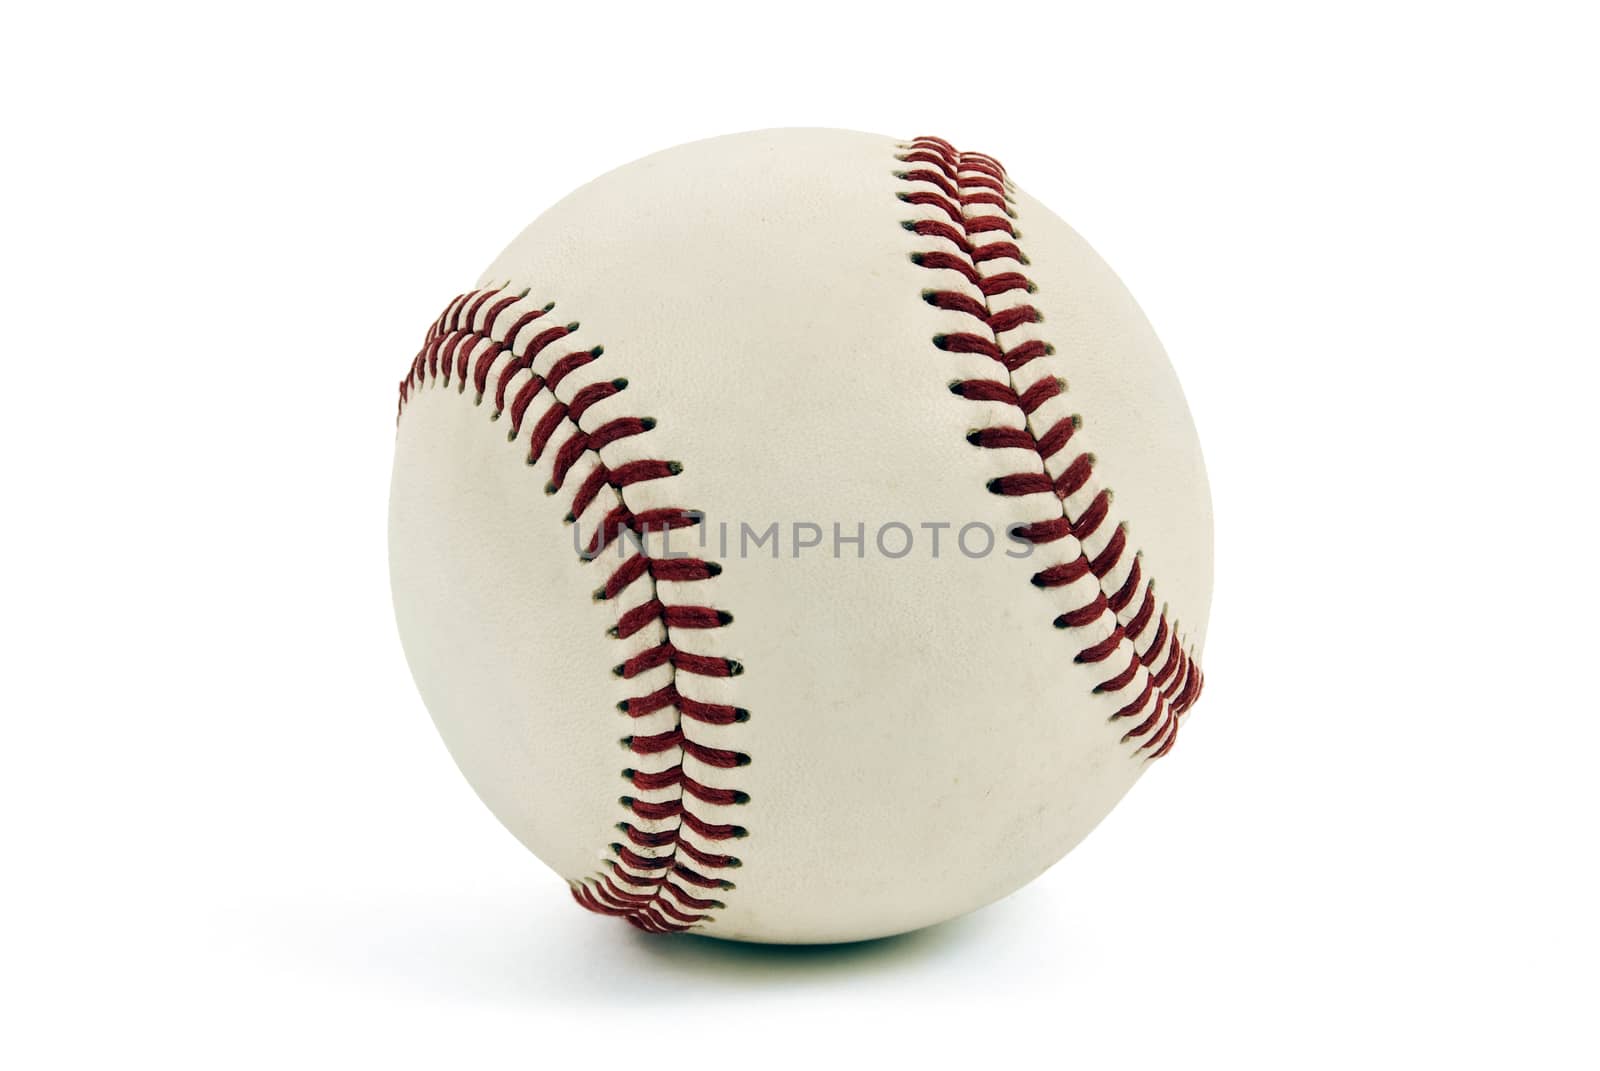 Baseball close up on white background with shadow at base.